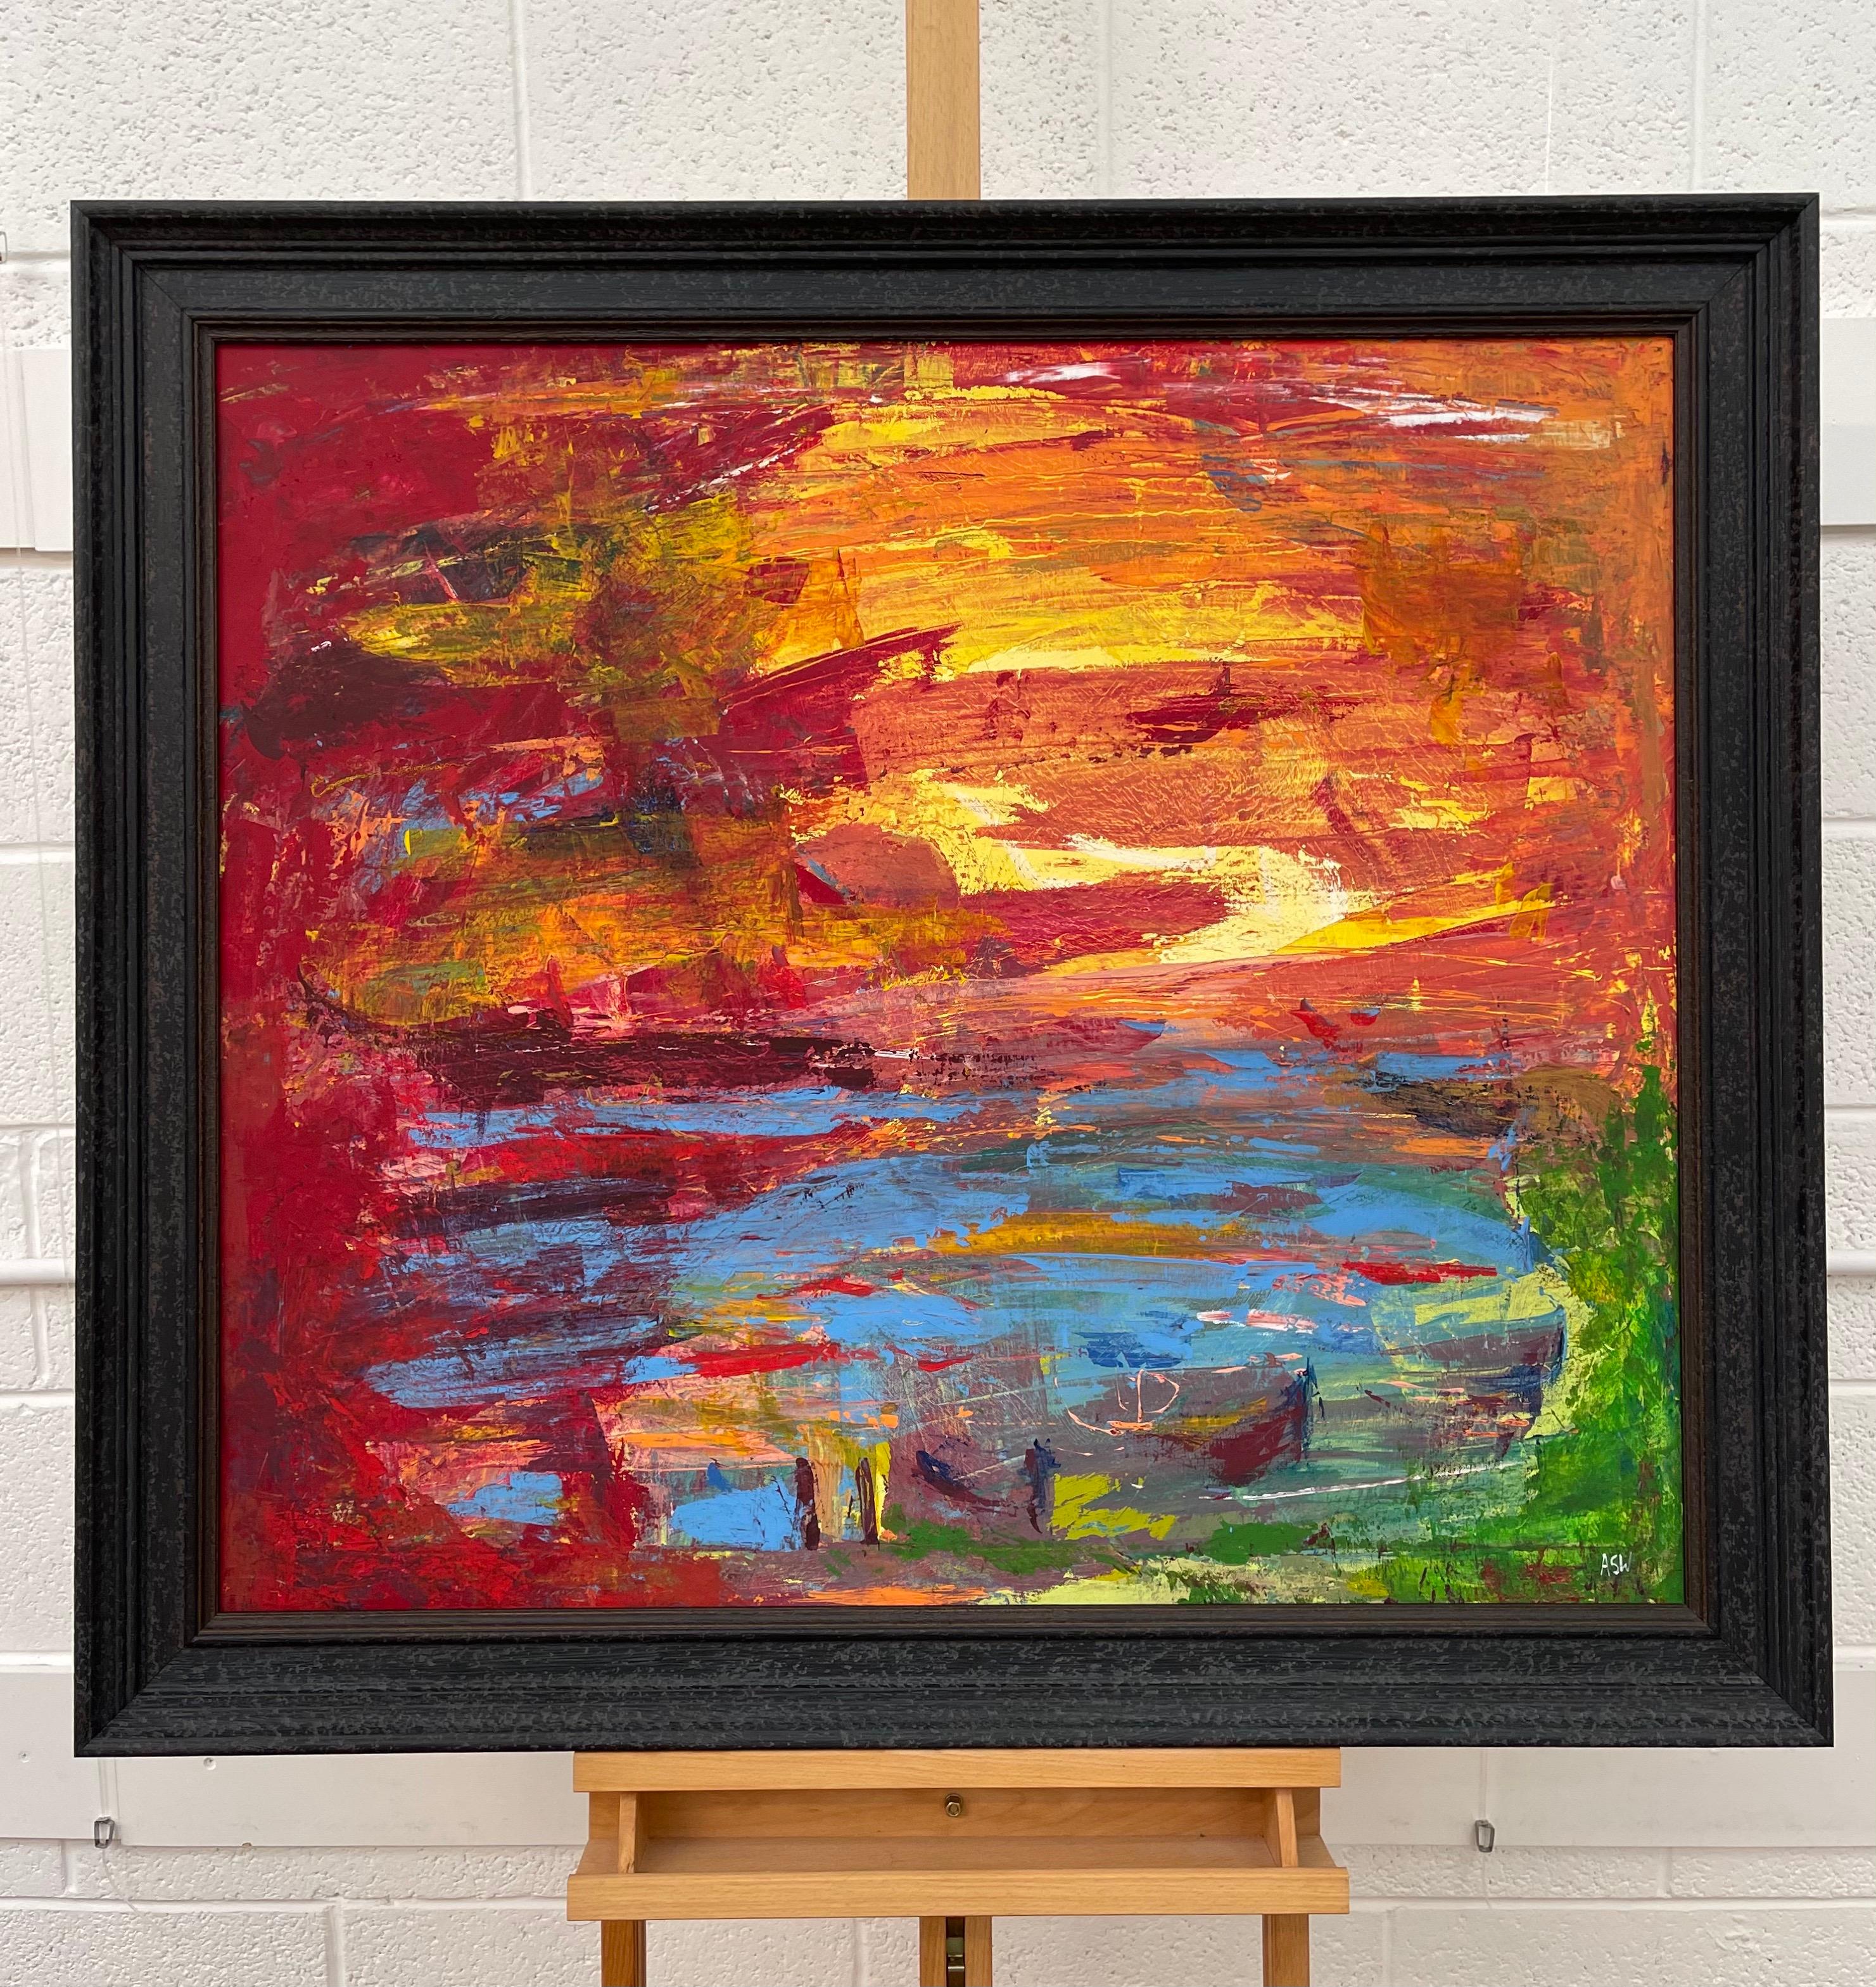 Abstract Blue Orange & Red Lake Sunset Landscape by Contemporary British Artist For Sale 1